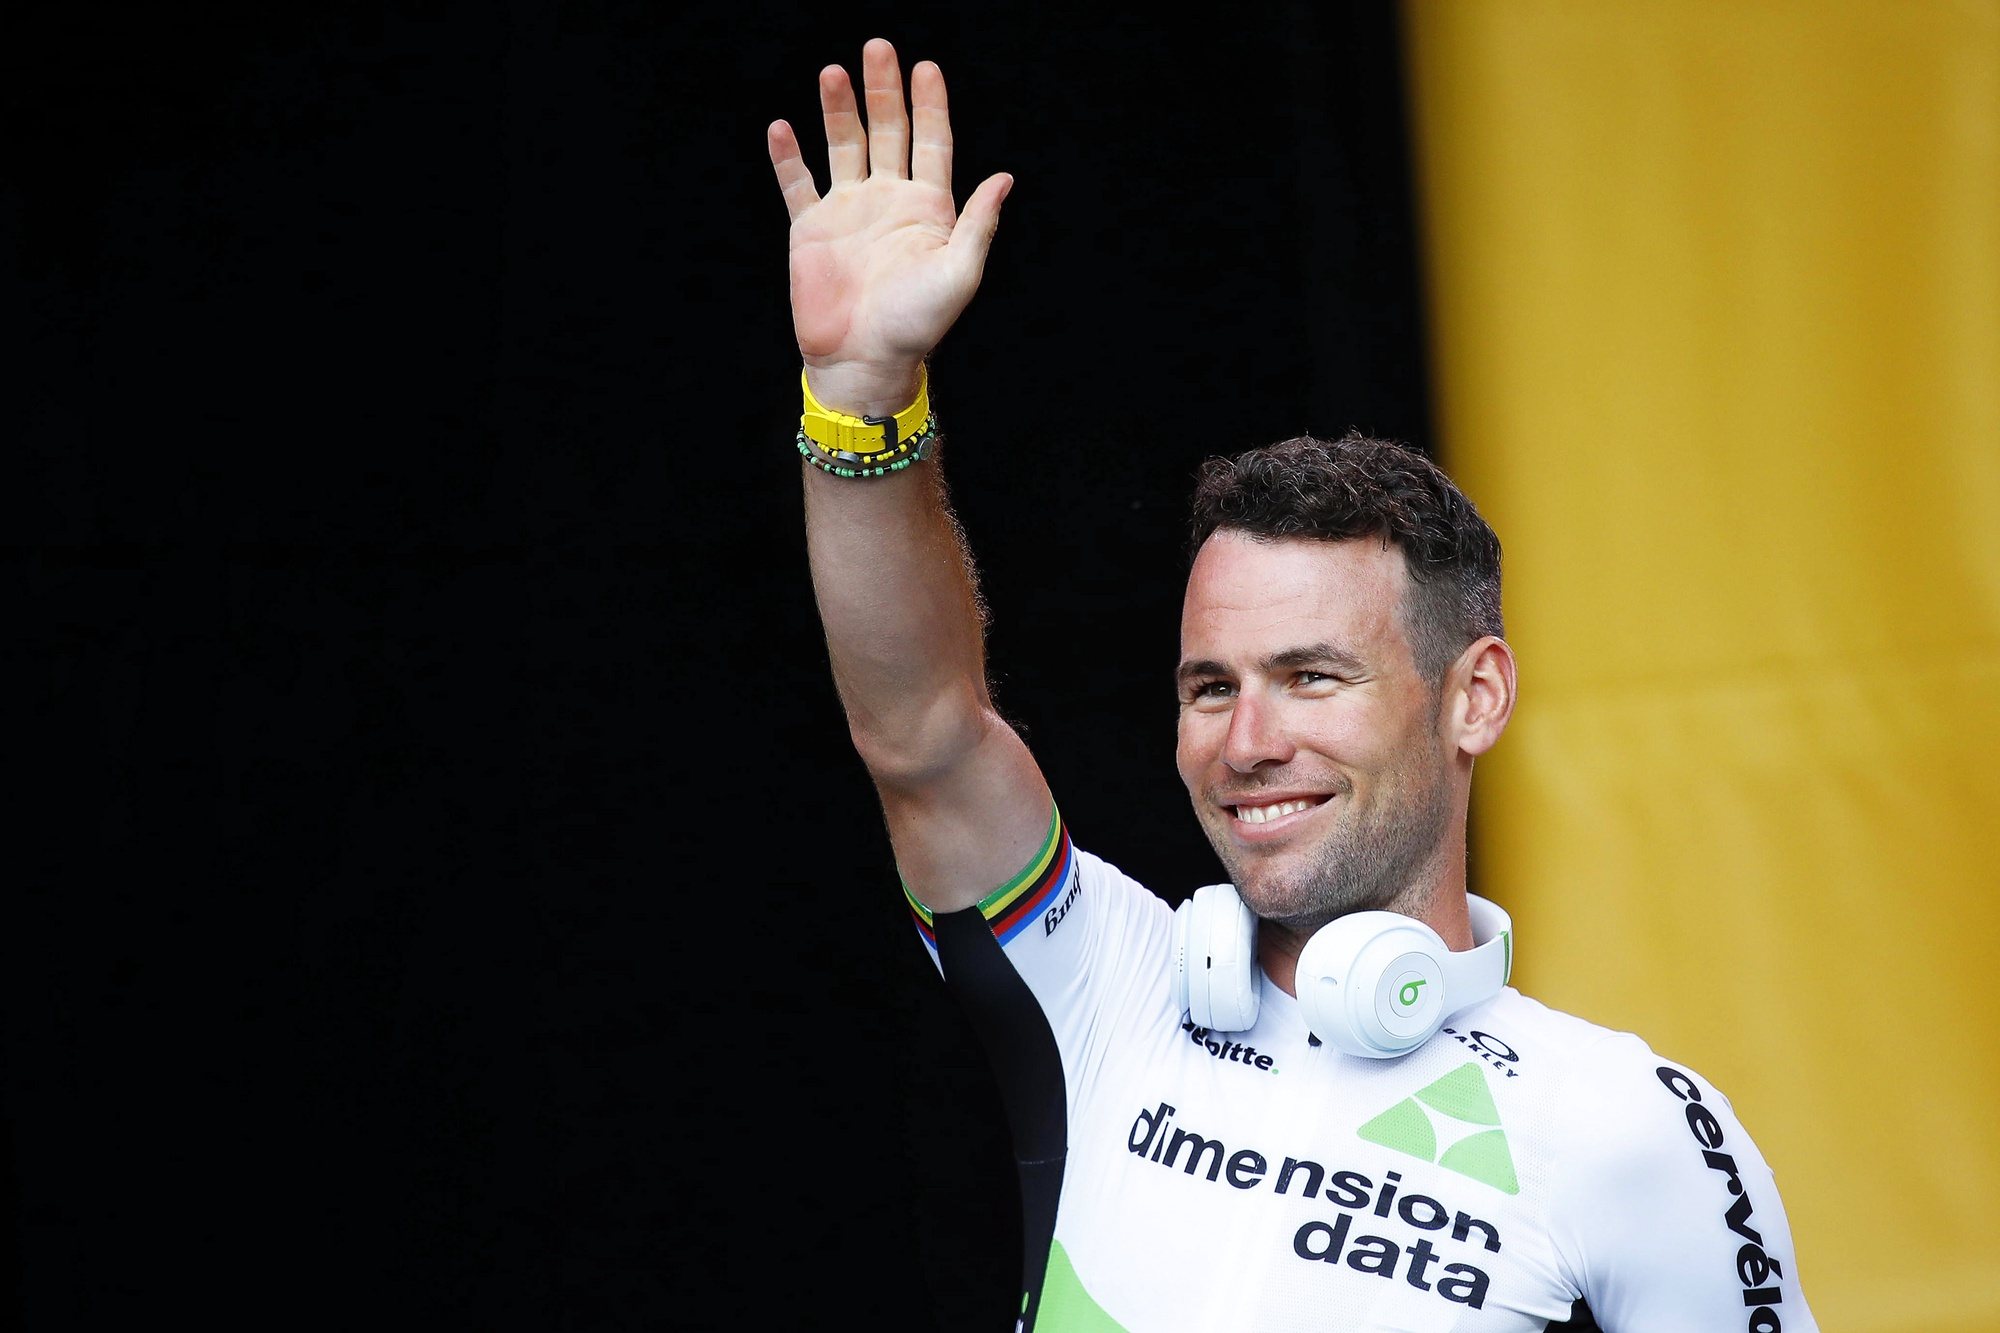 epa06866382 British rider Mark Cavendish of Team Dimension Data attends the opening ceremony of the 105th edition of the Tour de France 2018 cycling race in La Roche-sur-Yon, France, 05 July 2018. The 105th edition of the Tour de France will start in Noirmoutier-en-l&#039;Ile on 07 July 2018.  EPA/KIM LUDBROOK